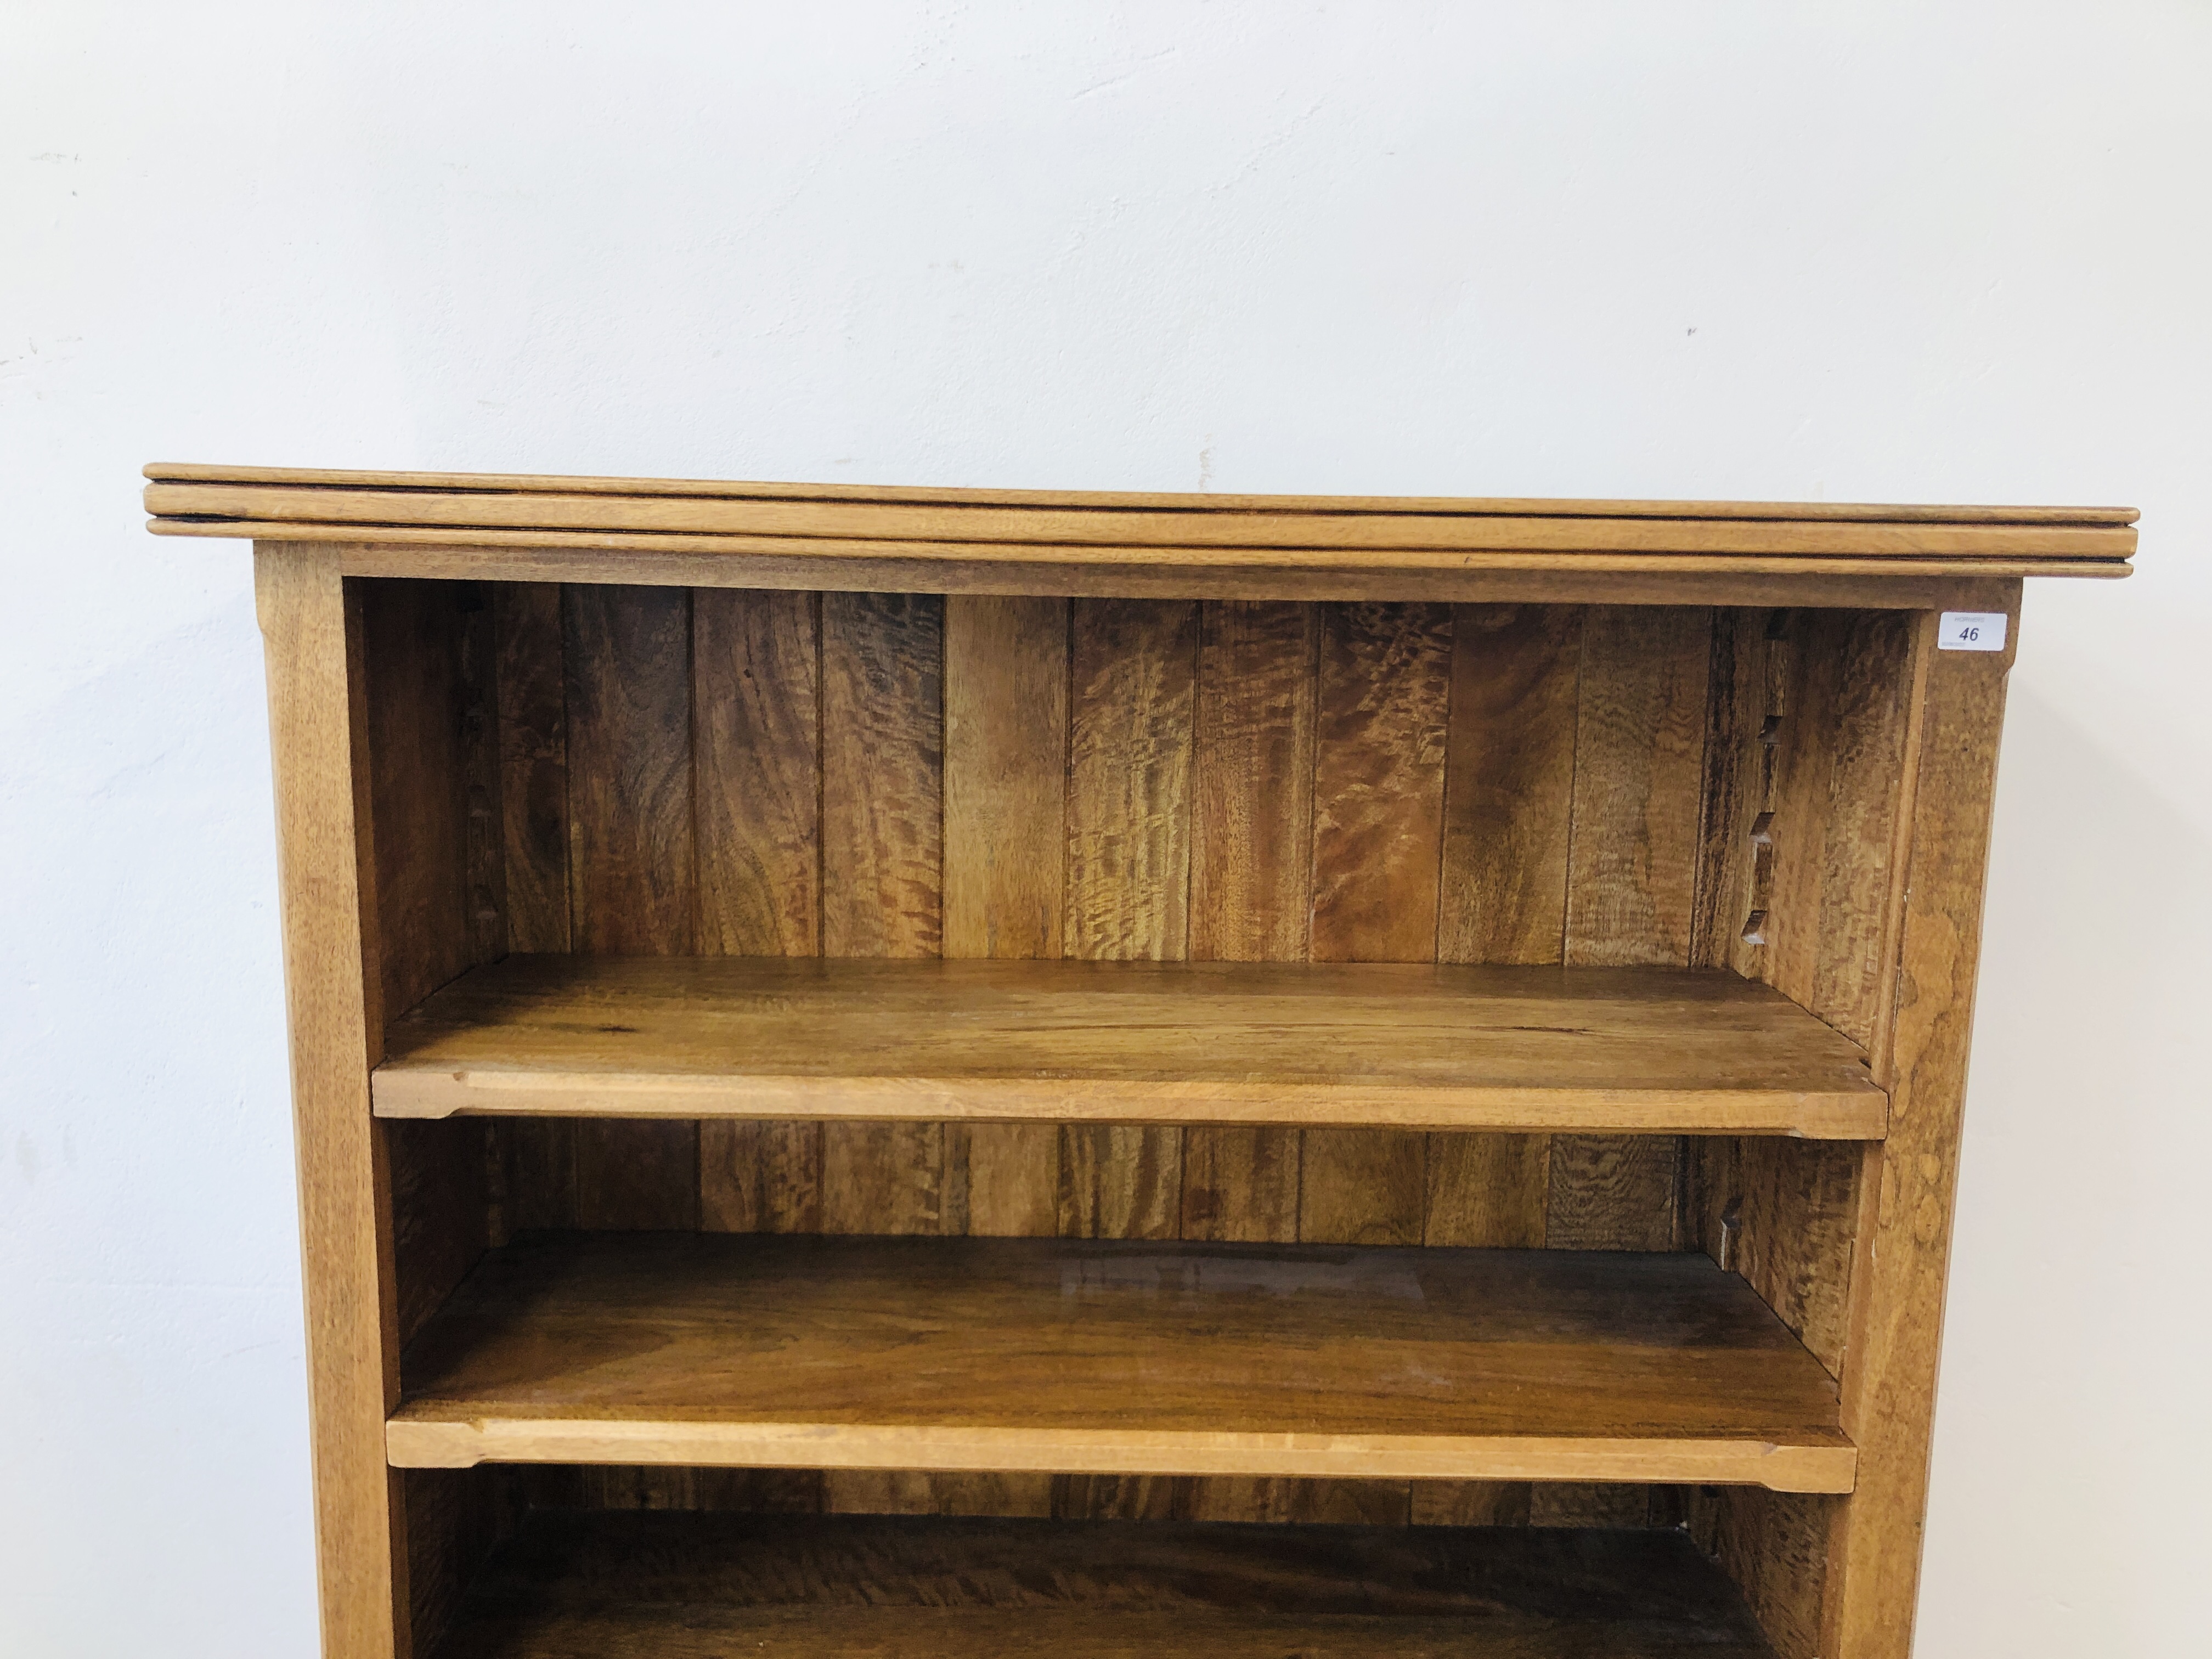 BAKER BEDFORD STYLE FLAGSTORE TWO DRAWER BOOKSHELF WITH ADJUSTABLE STELVES - HEIGHT 190CM. - Image 2 of 8